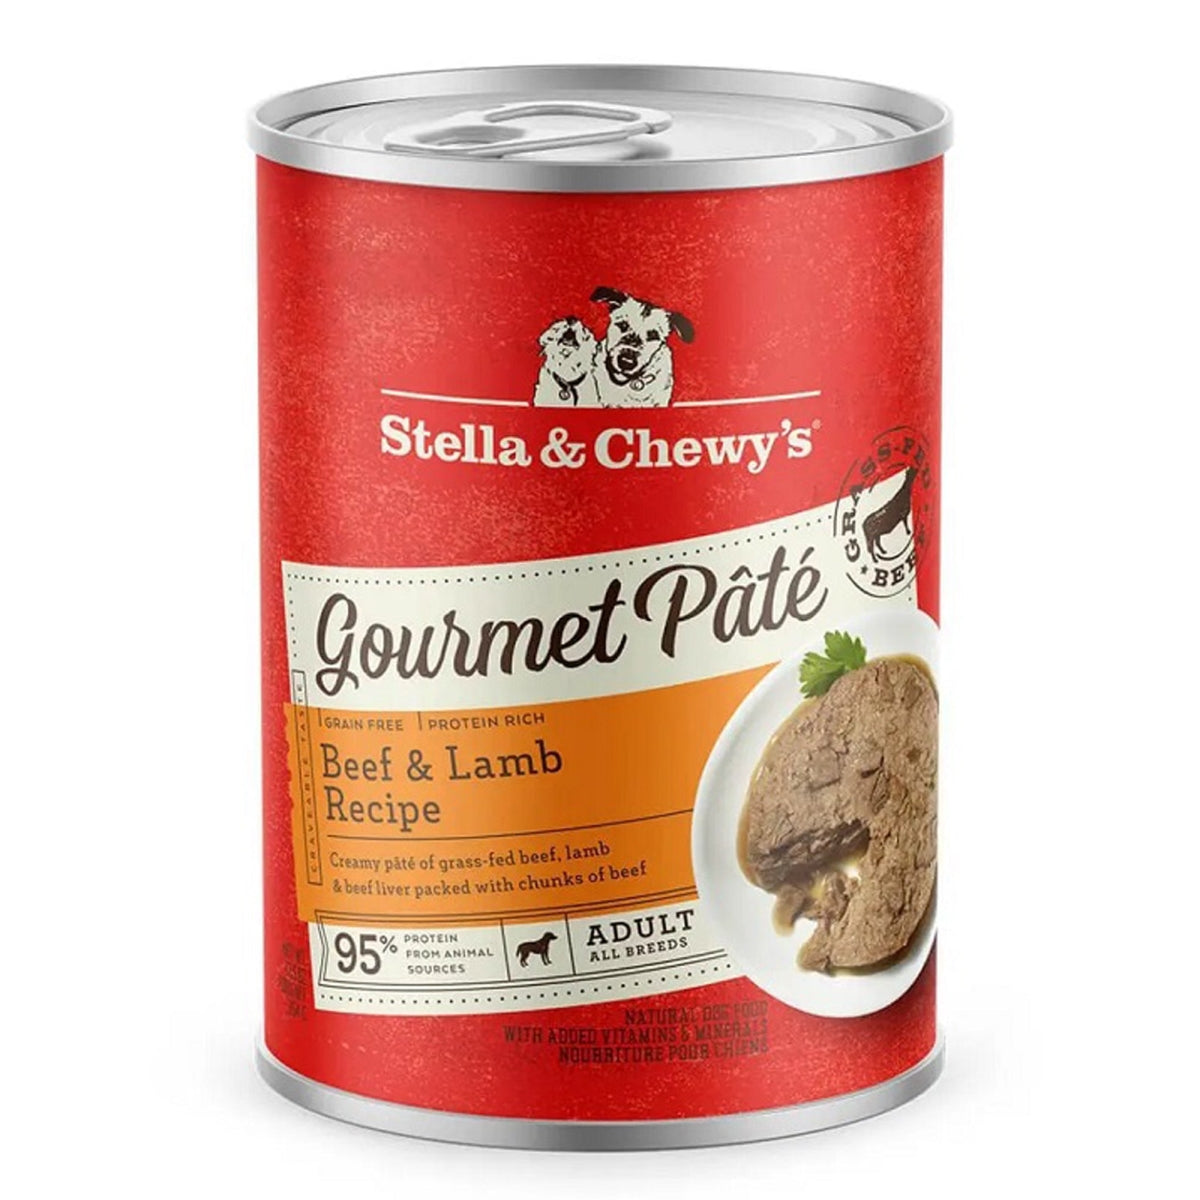 Stella and Chewy's 12.5 oz Gourmet Pate Beef & Lamb Dog Food